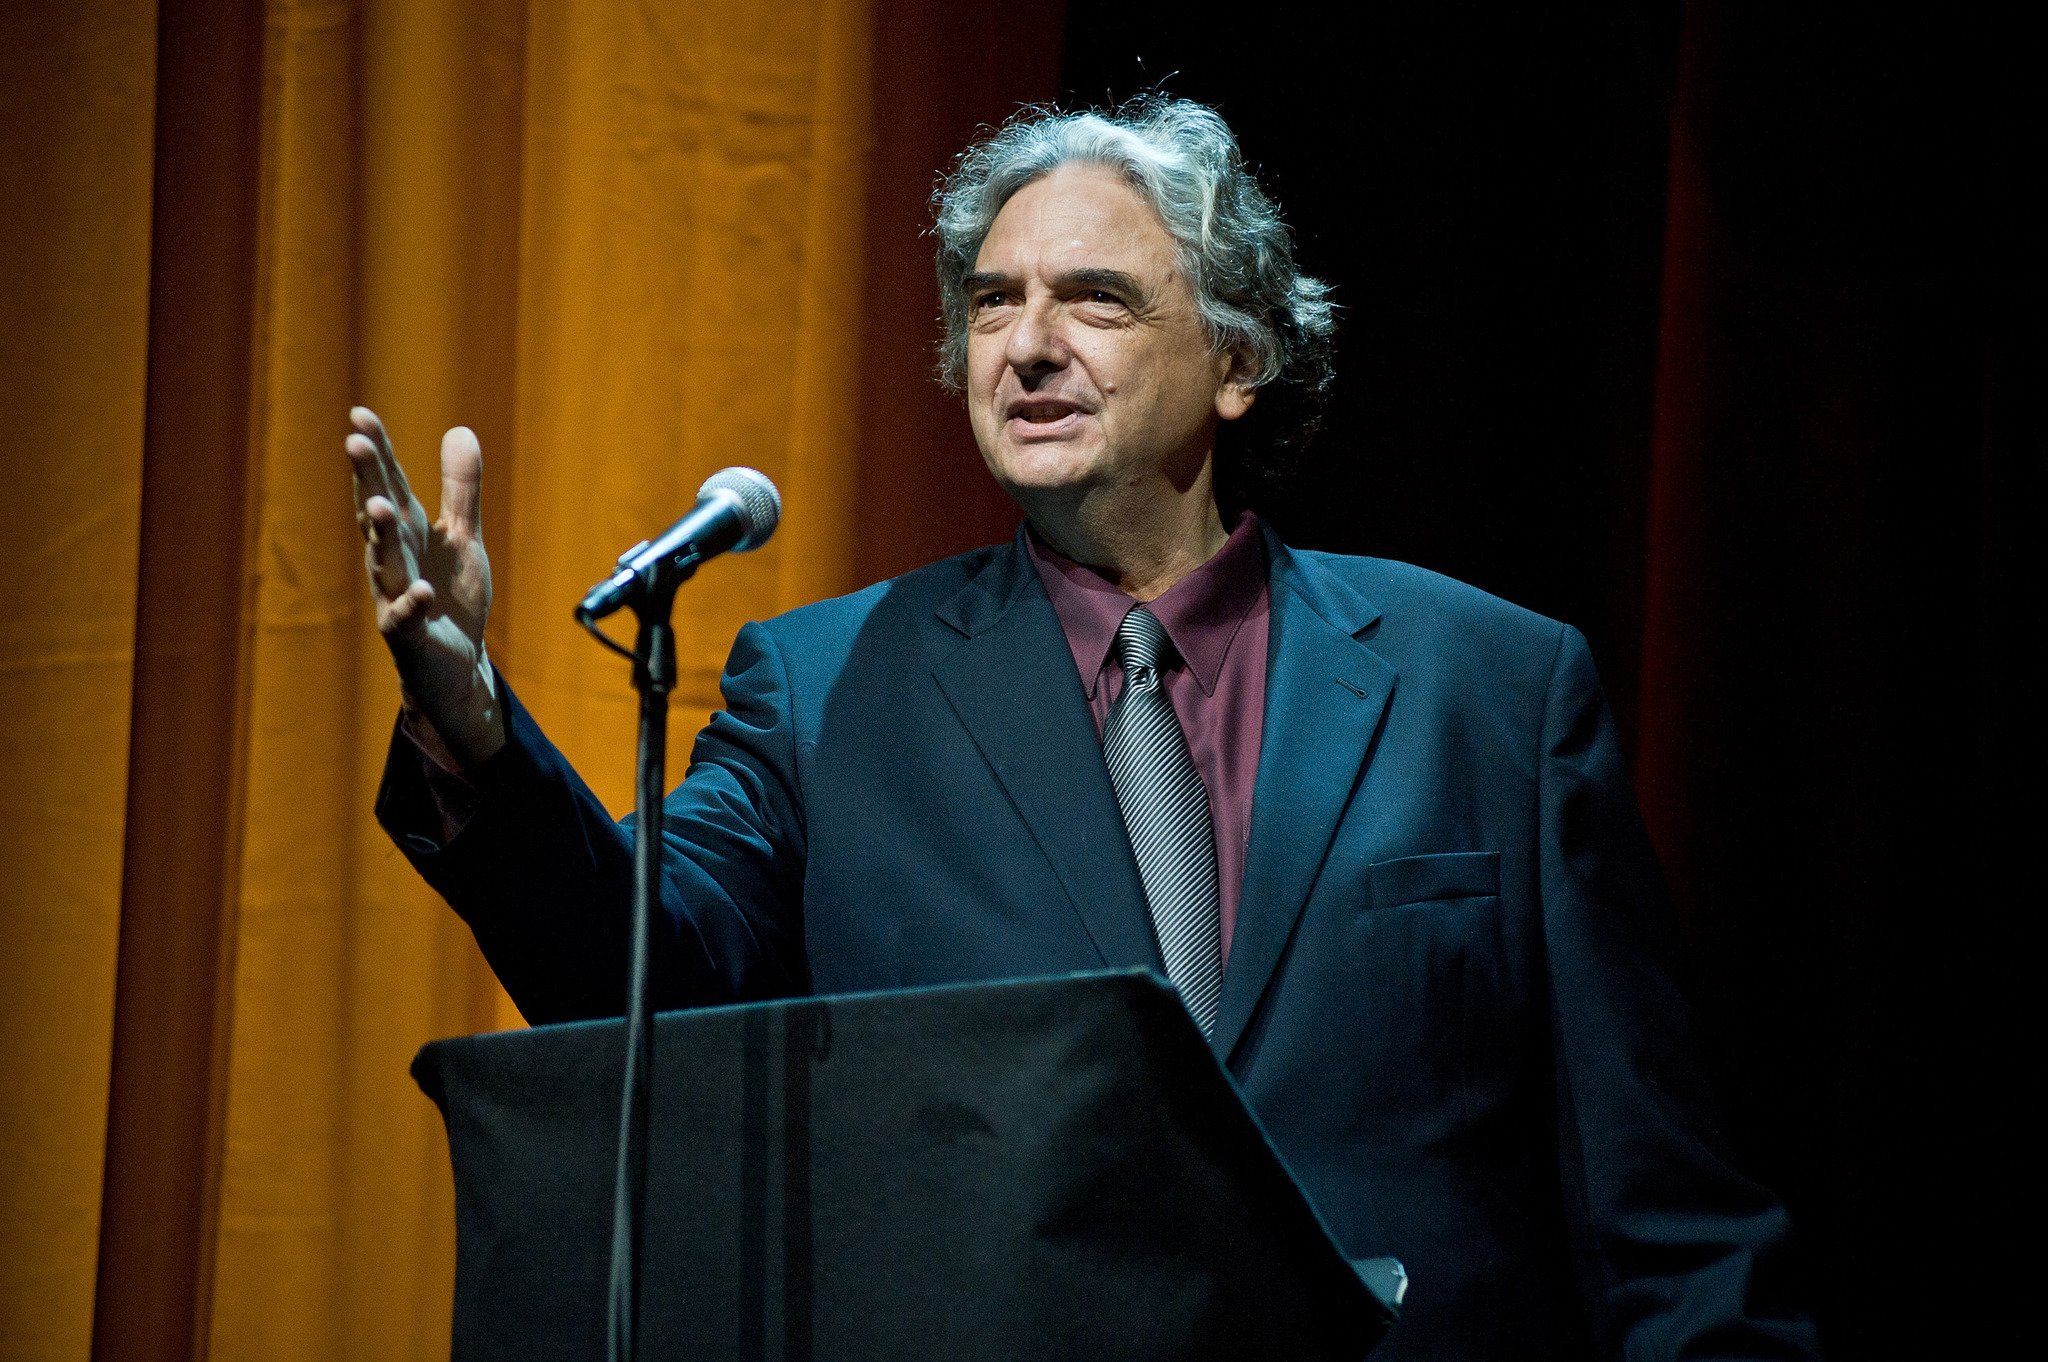 Director Gregory Nava attends the Roger Ebert Memorial Tribute at Chicago Theatre on April 11, 2013 in Chicago, Illinois.